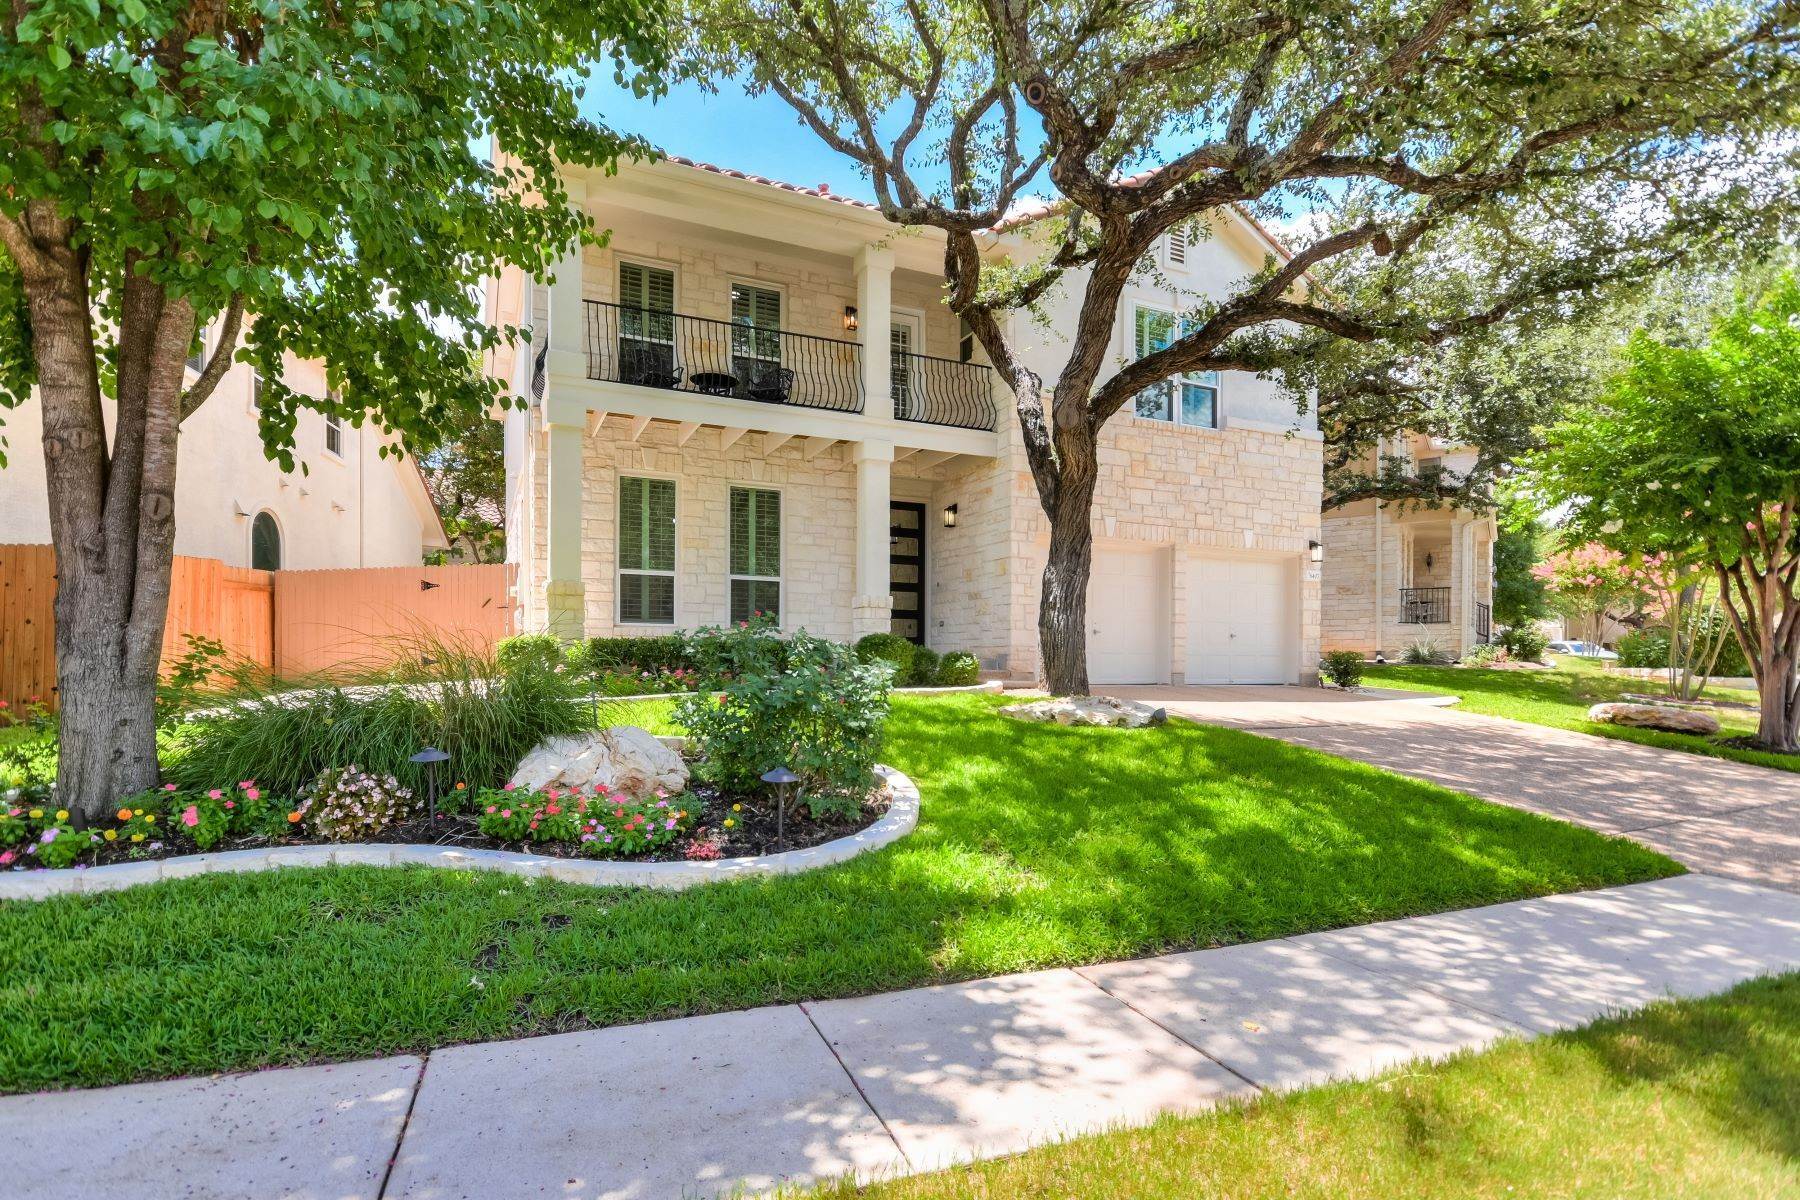 Single Family Homes for Sale at Move in Ready Stunning Home in Gated Community 6407 Tasajillo Trail Austin, Texas 78739 United States